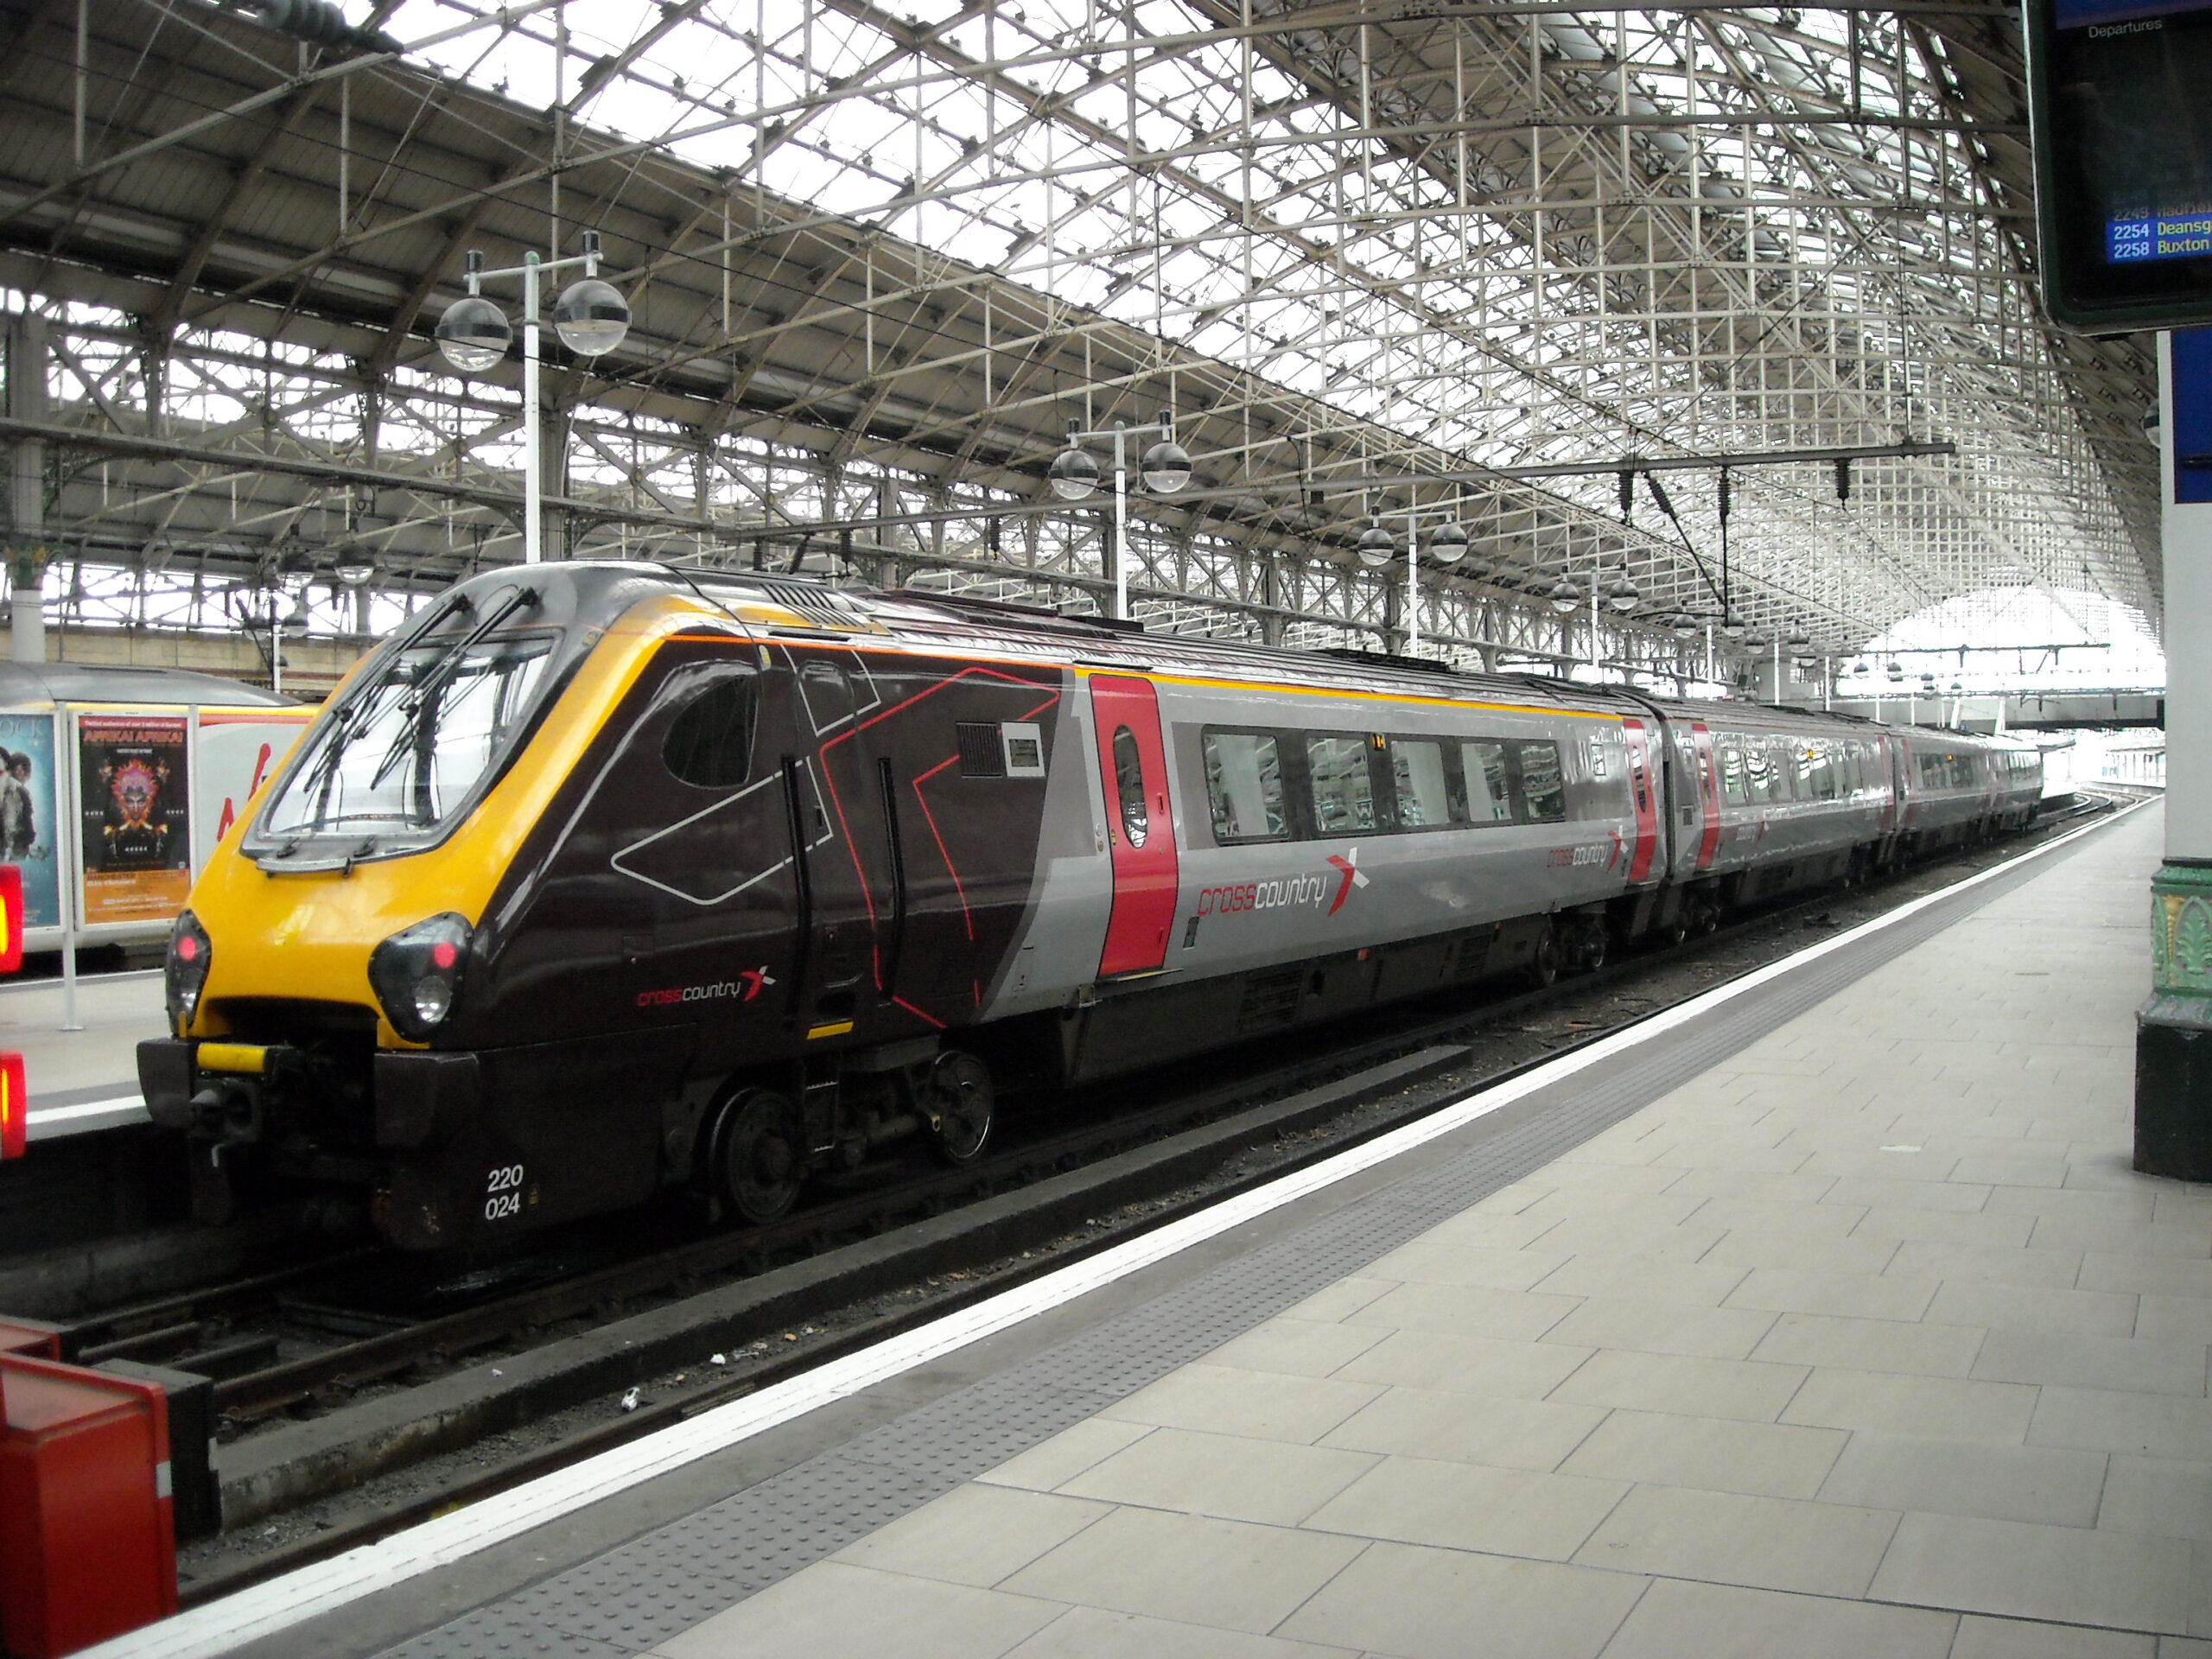 A CrossCountry Voyager train